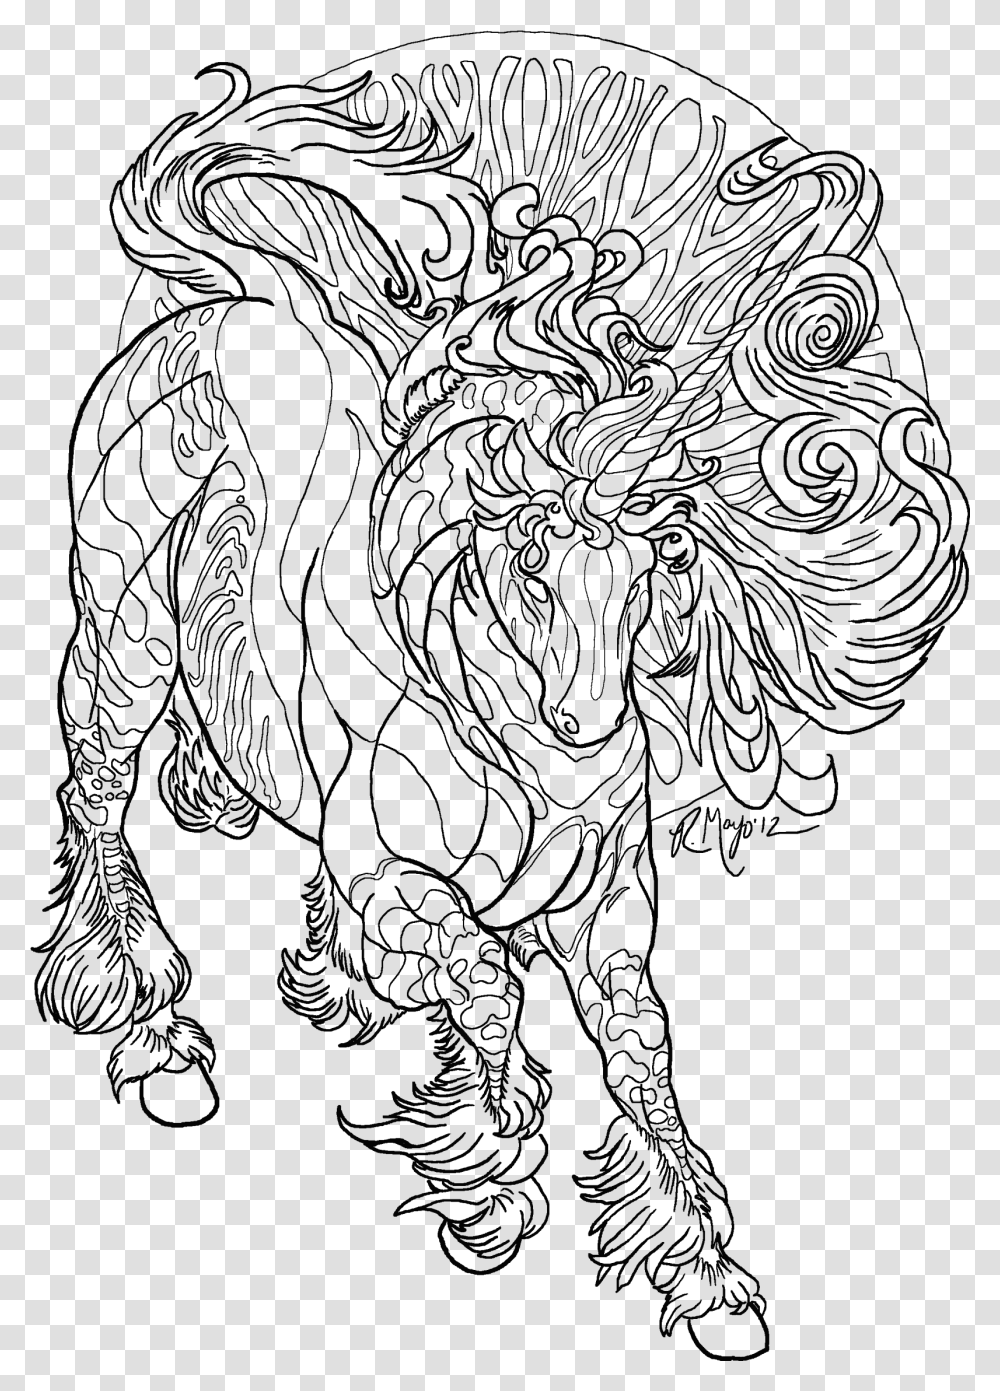 Line Art Coloring Pages Coloring Pages For Adults Unicorn, Face ...